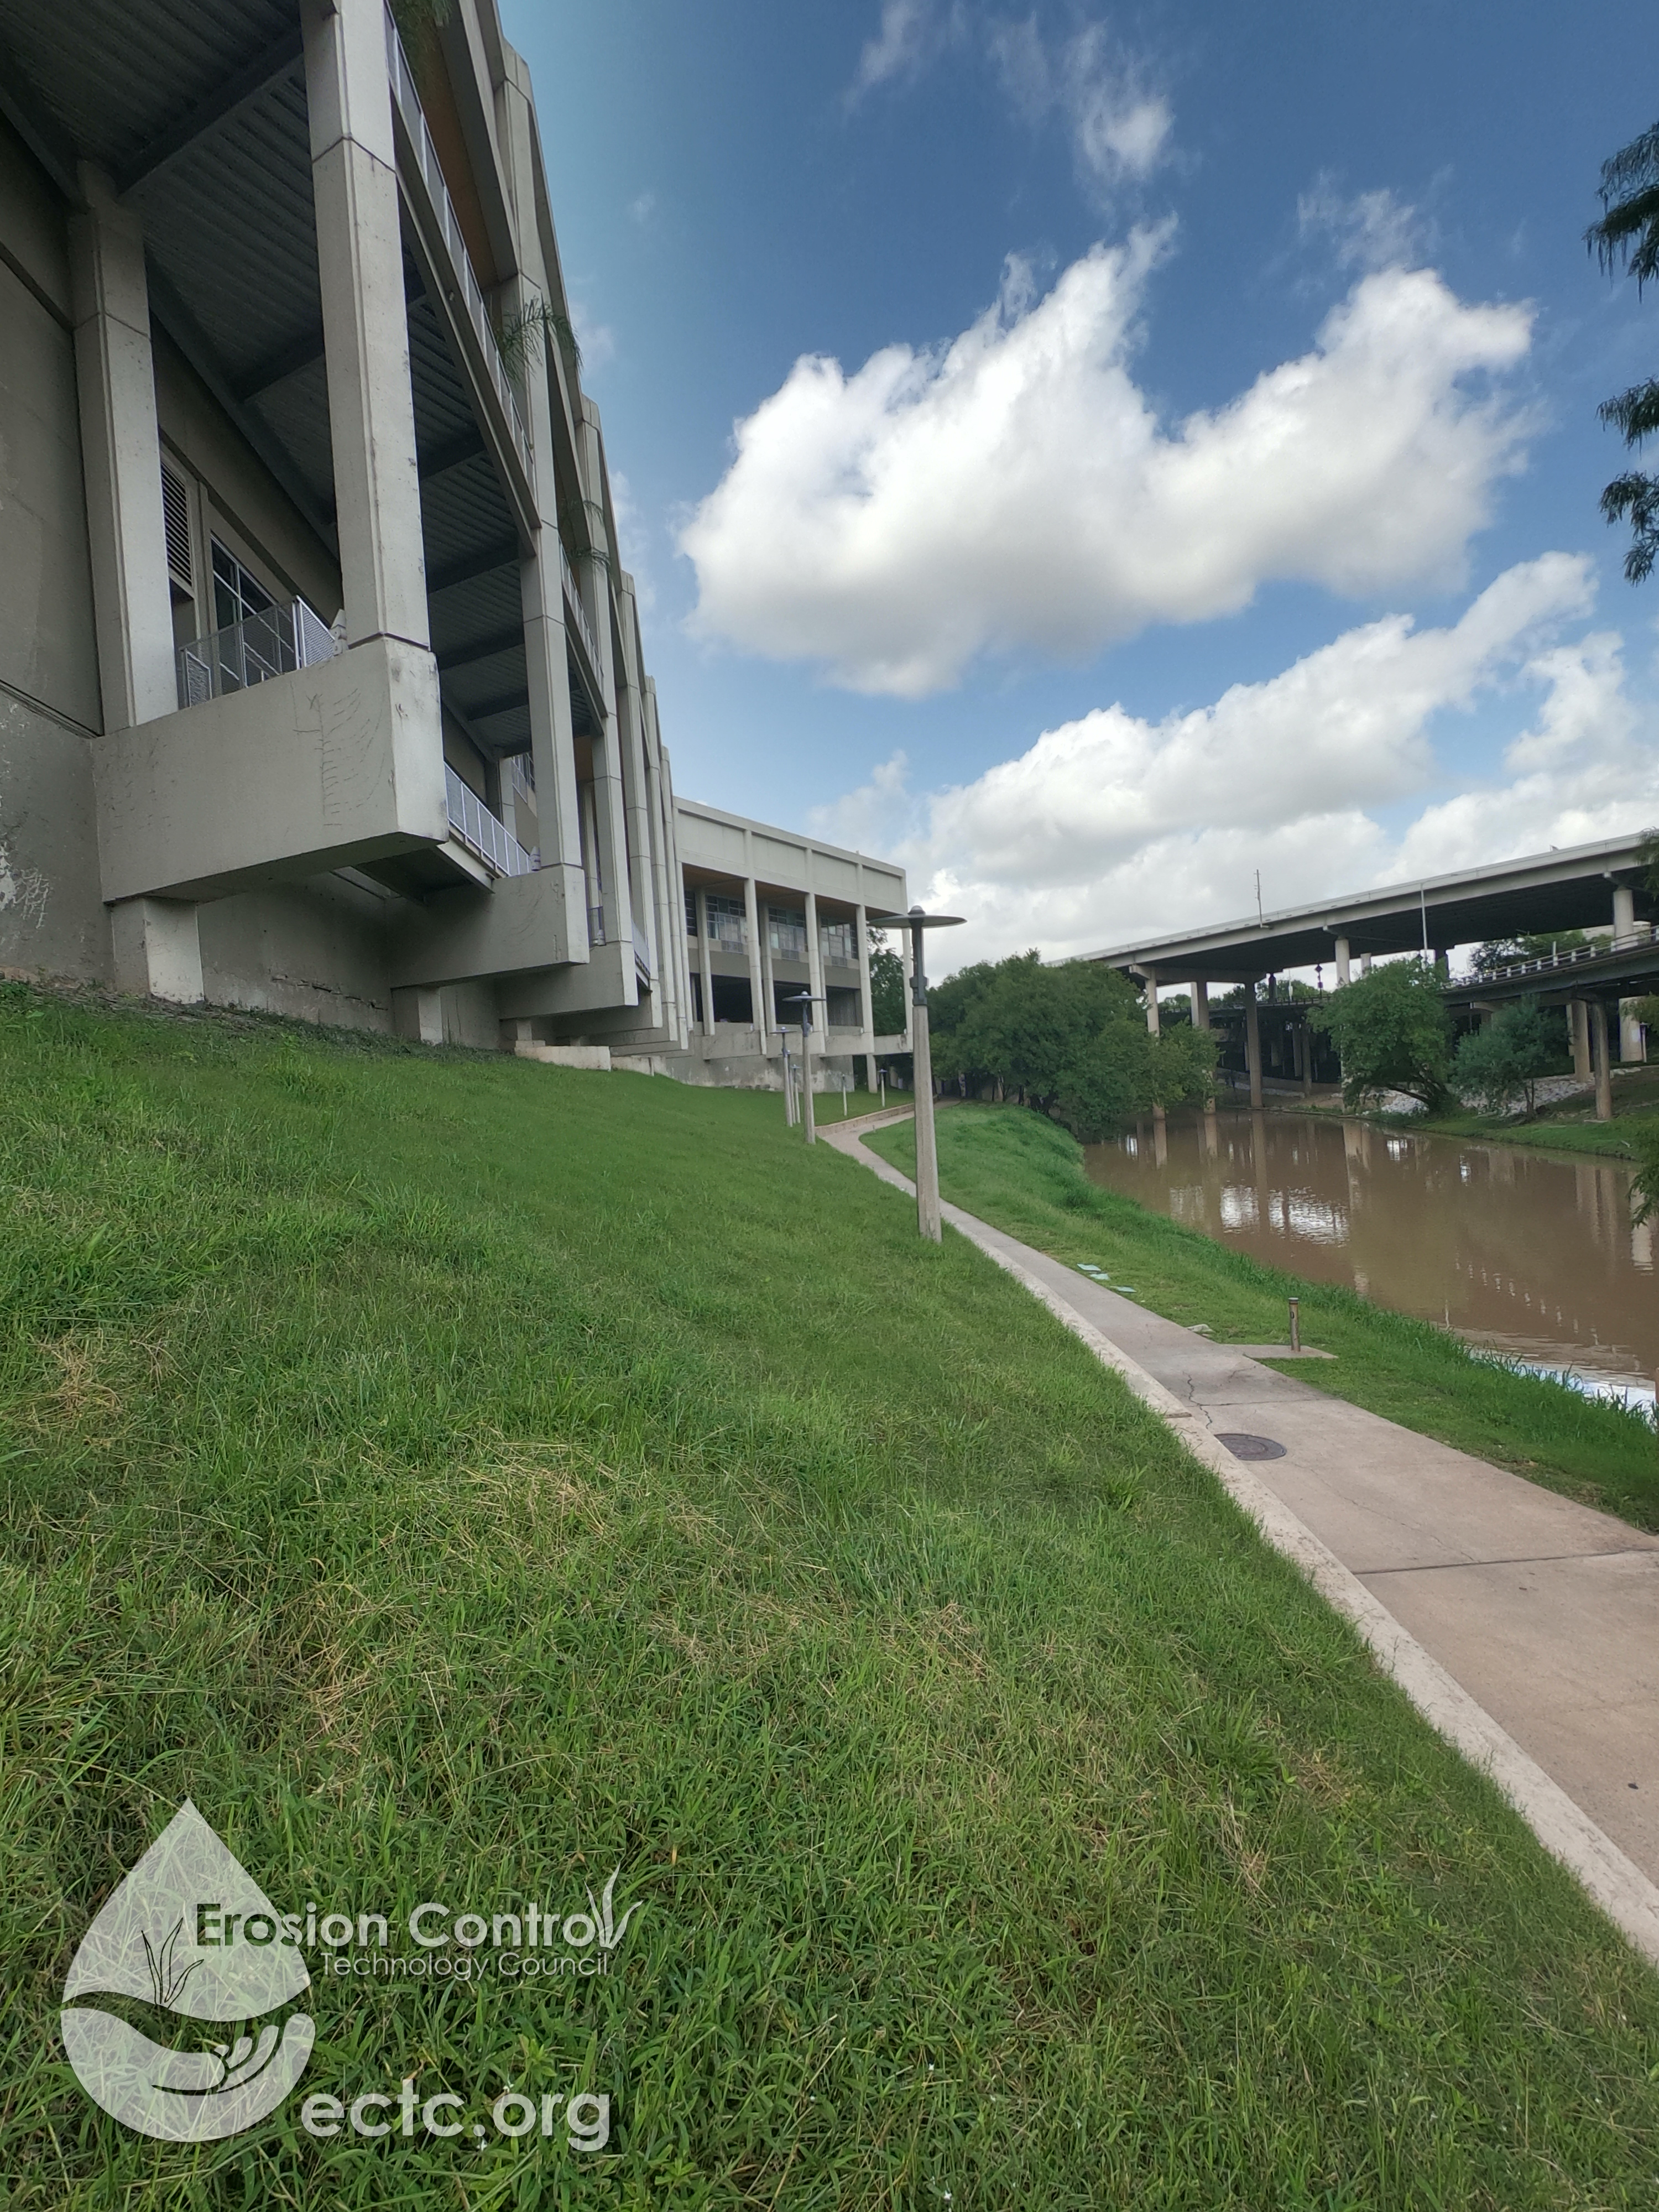 Hydraulic Erosion Control Products Used in the Wortham Theater District in Houston, TX after Hurricane Harvey hit.